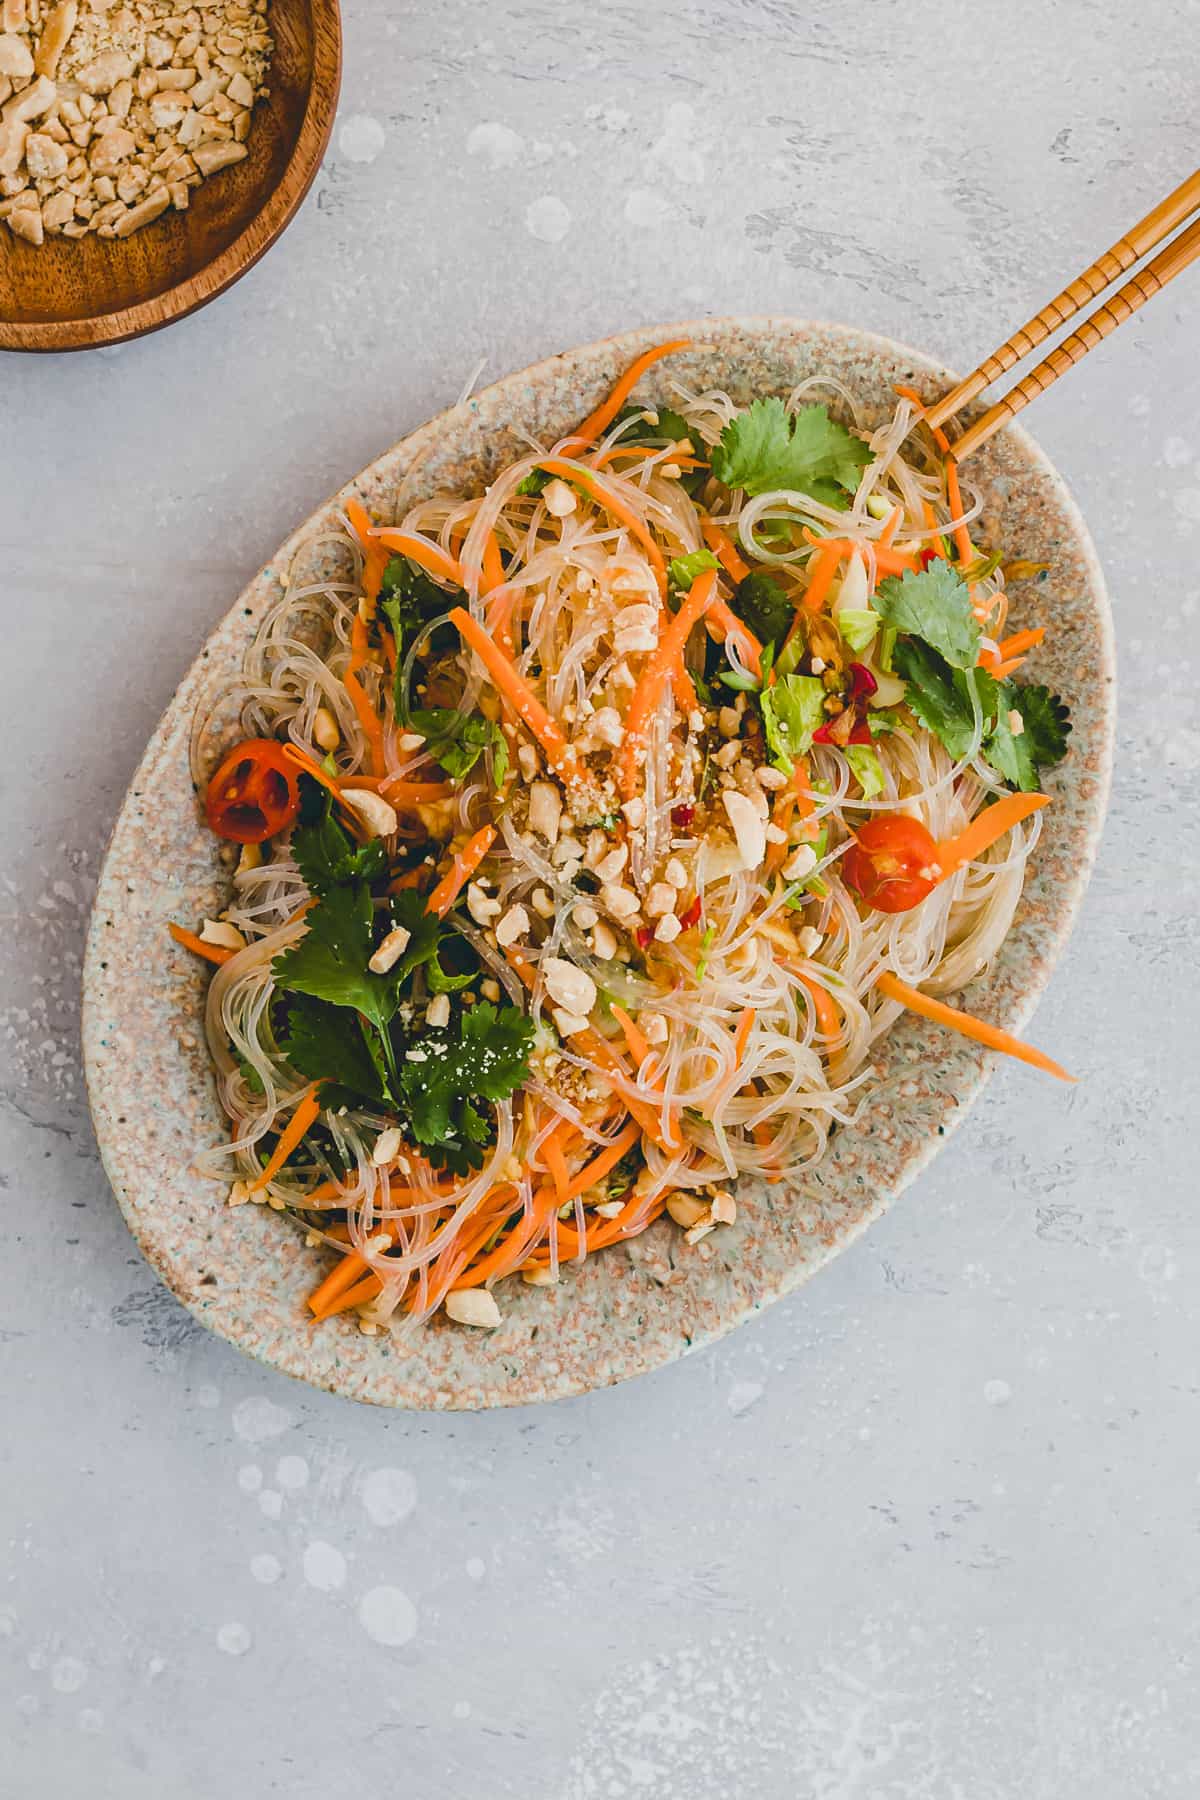 thai glass noodle salad next to a bowl of peanuts